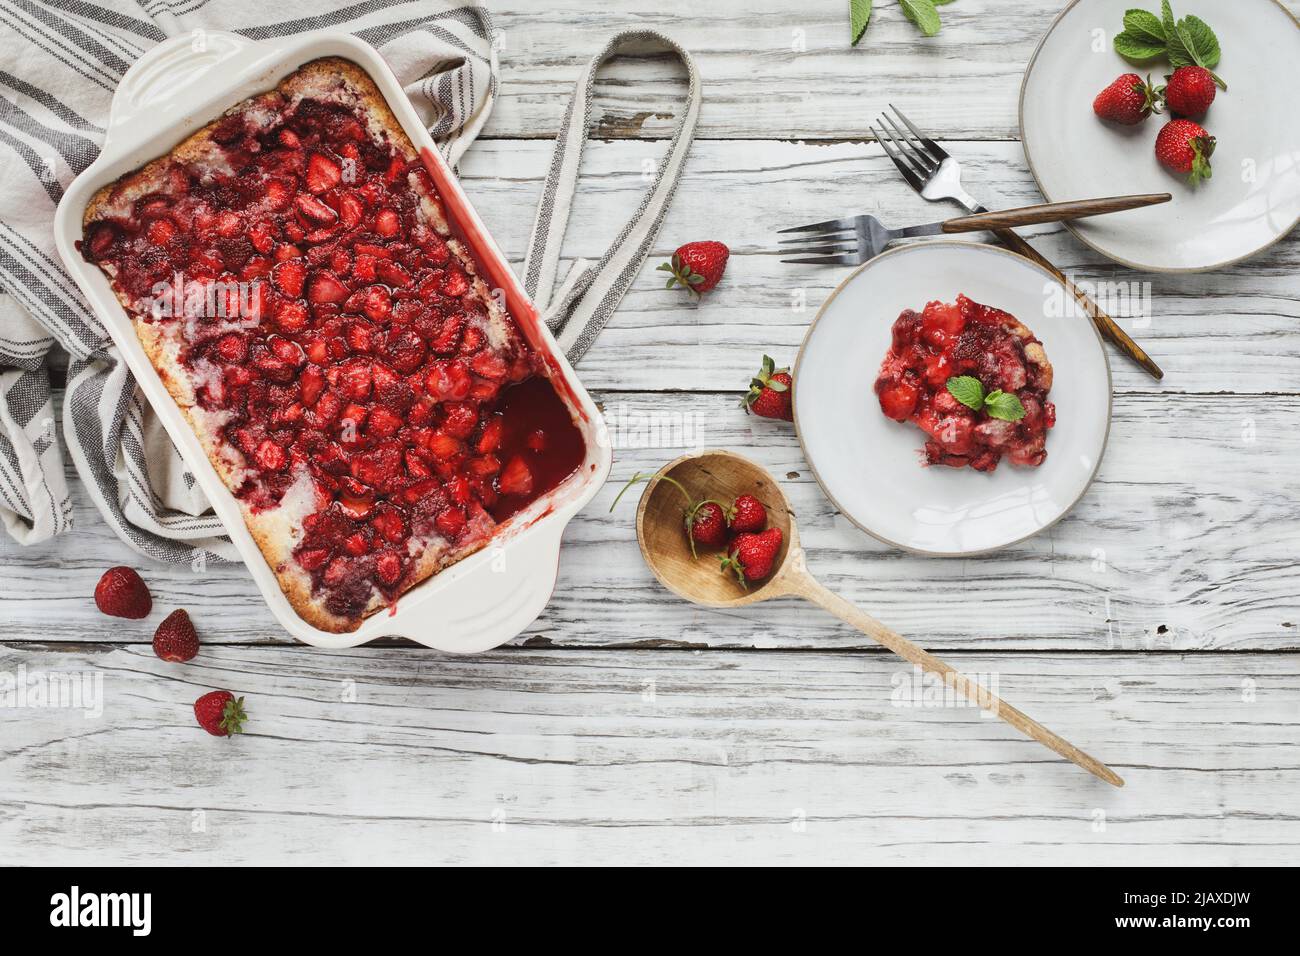 High angle top view of sweet homemade strawberry cobbler or Sonker baked in a red ceramic pan with serving in saucer, apron and wooden spoon. Stock Photo